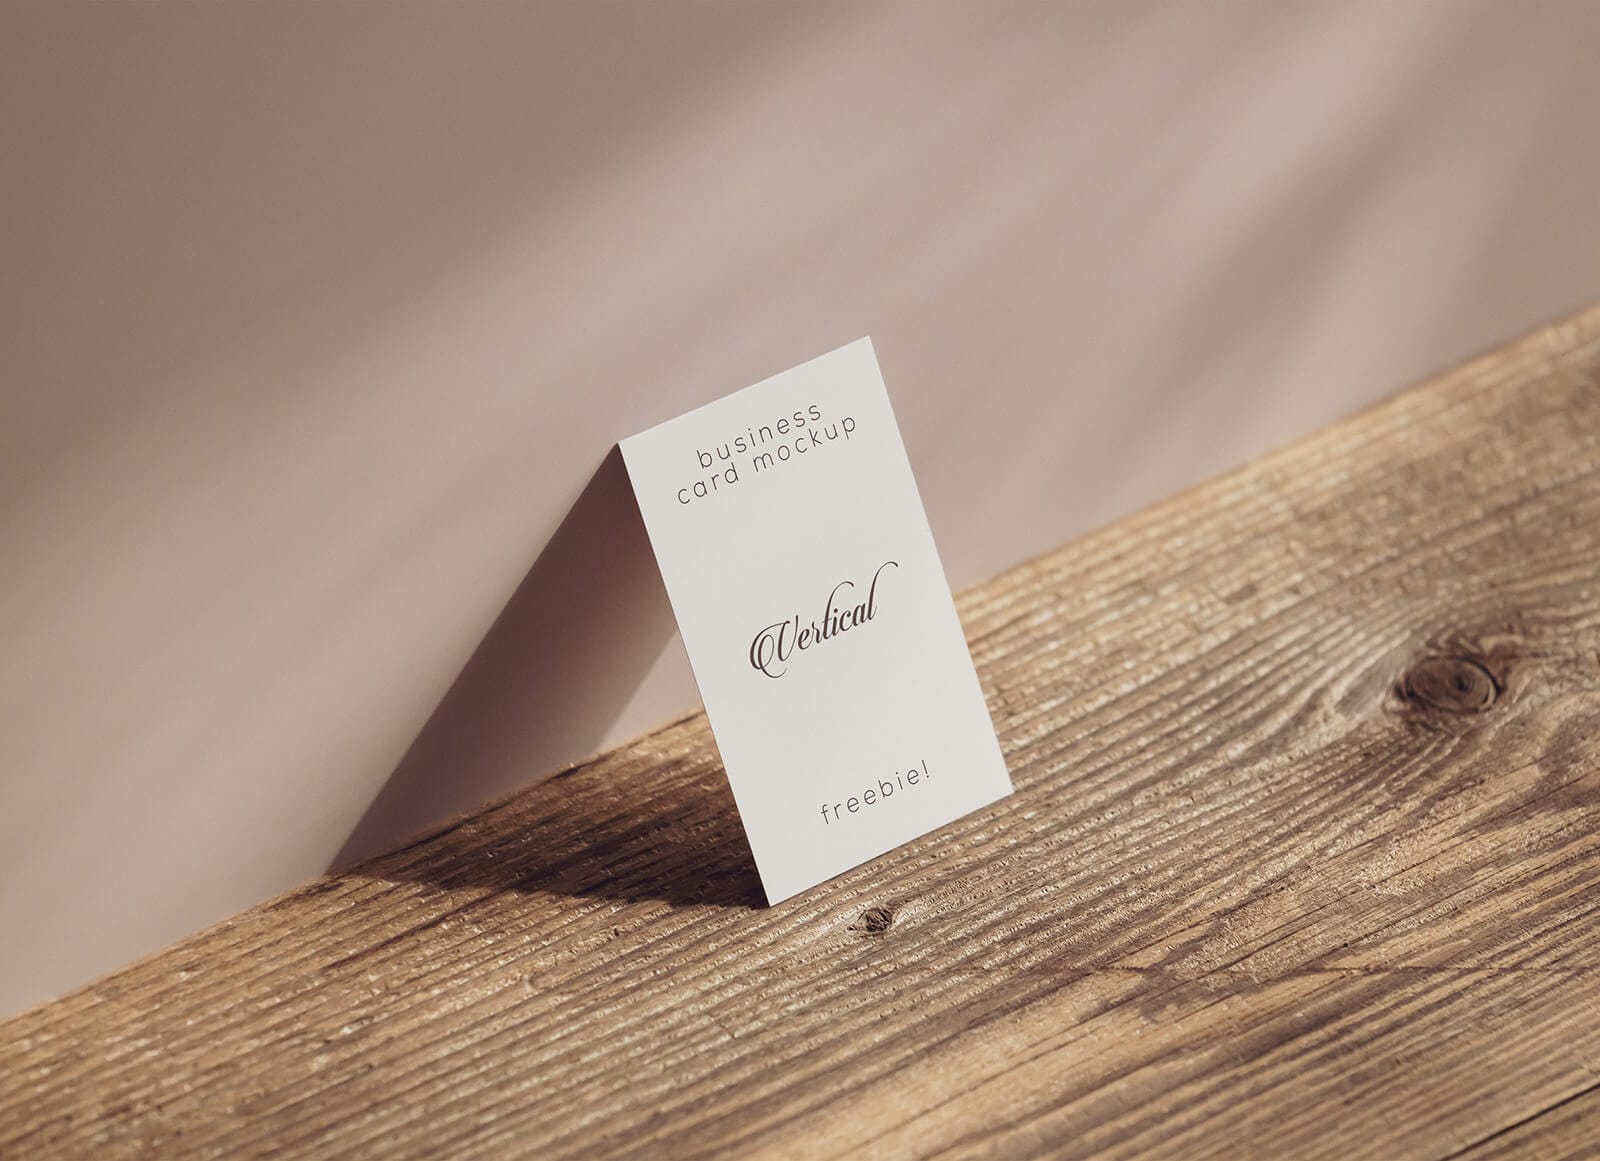 A free business card by the wall mockup